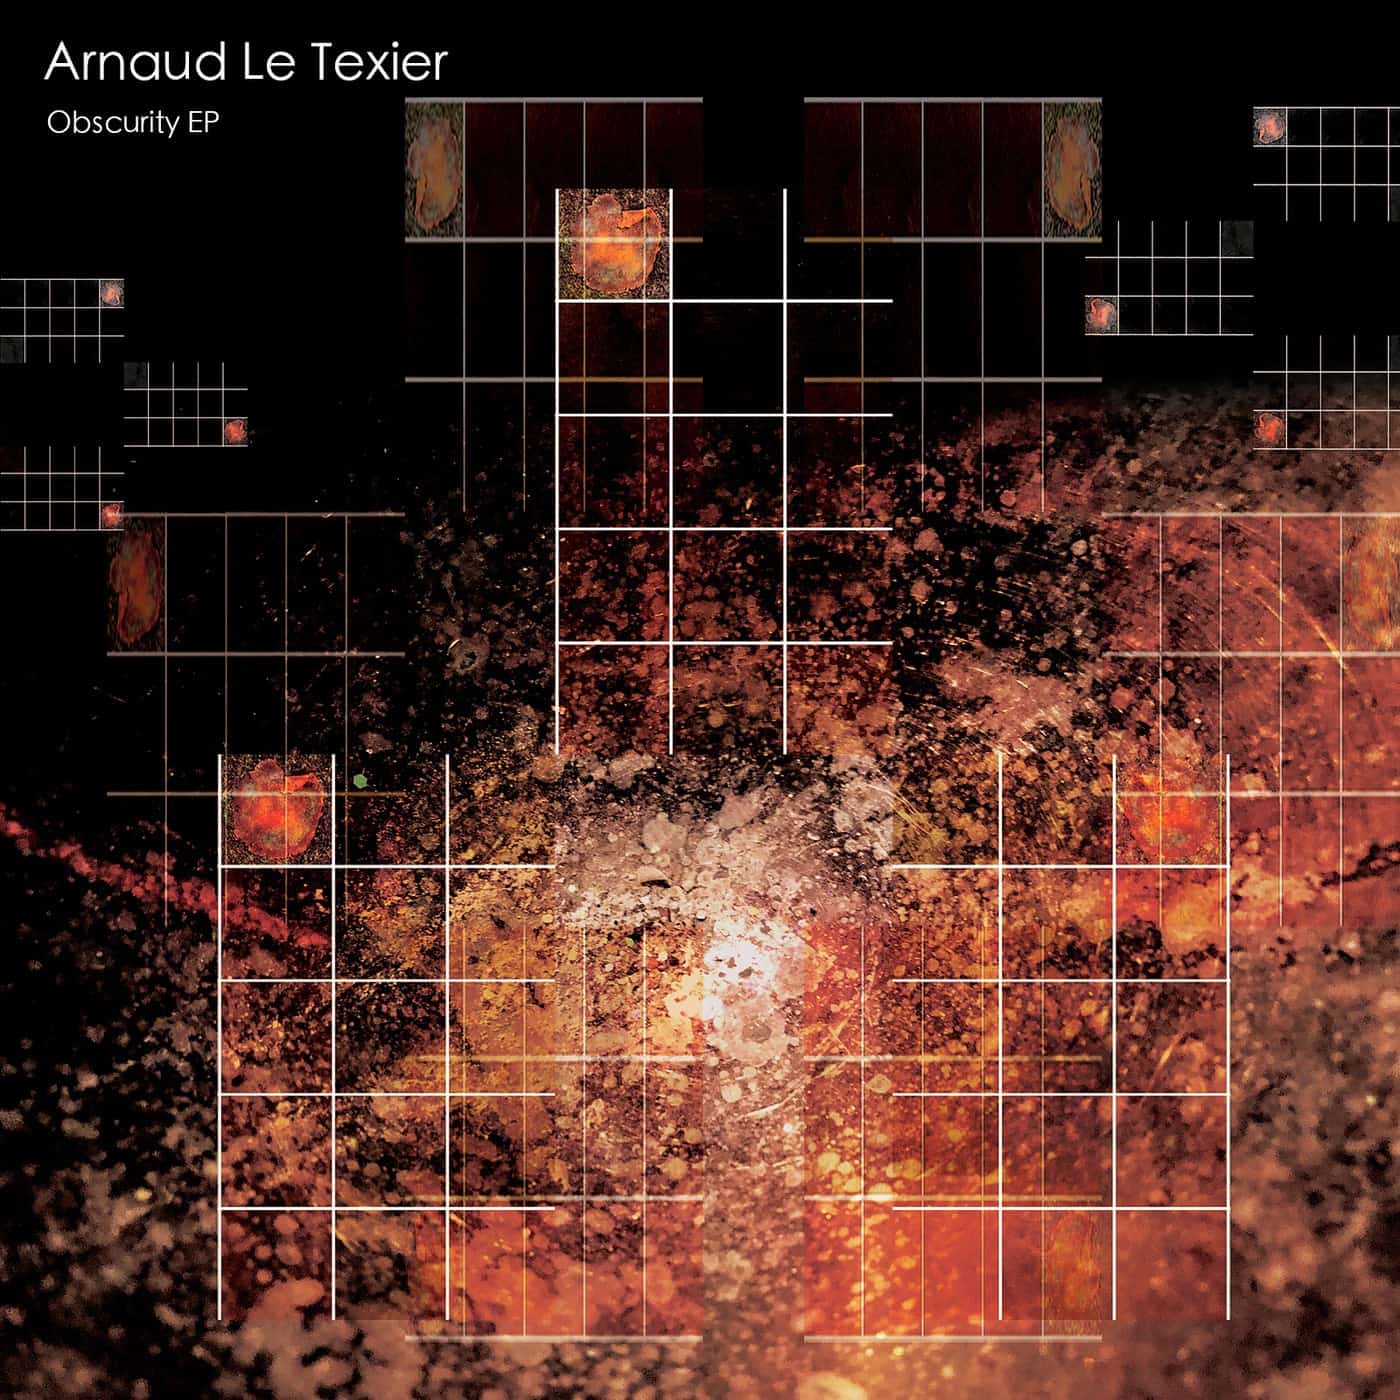 image cover: Arnaud Le Texier - Obscurity EP / EMPHATIC062